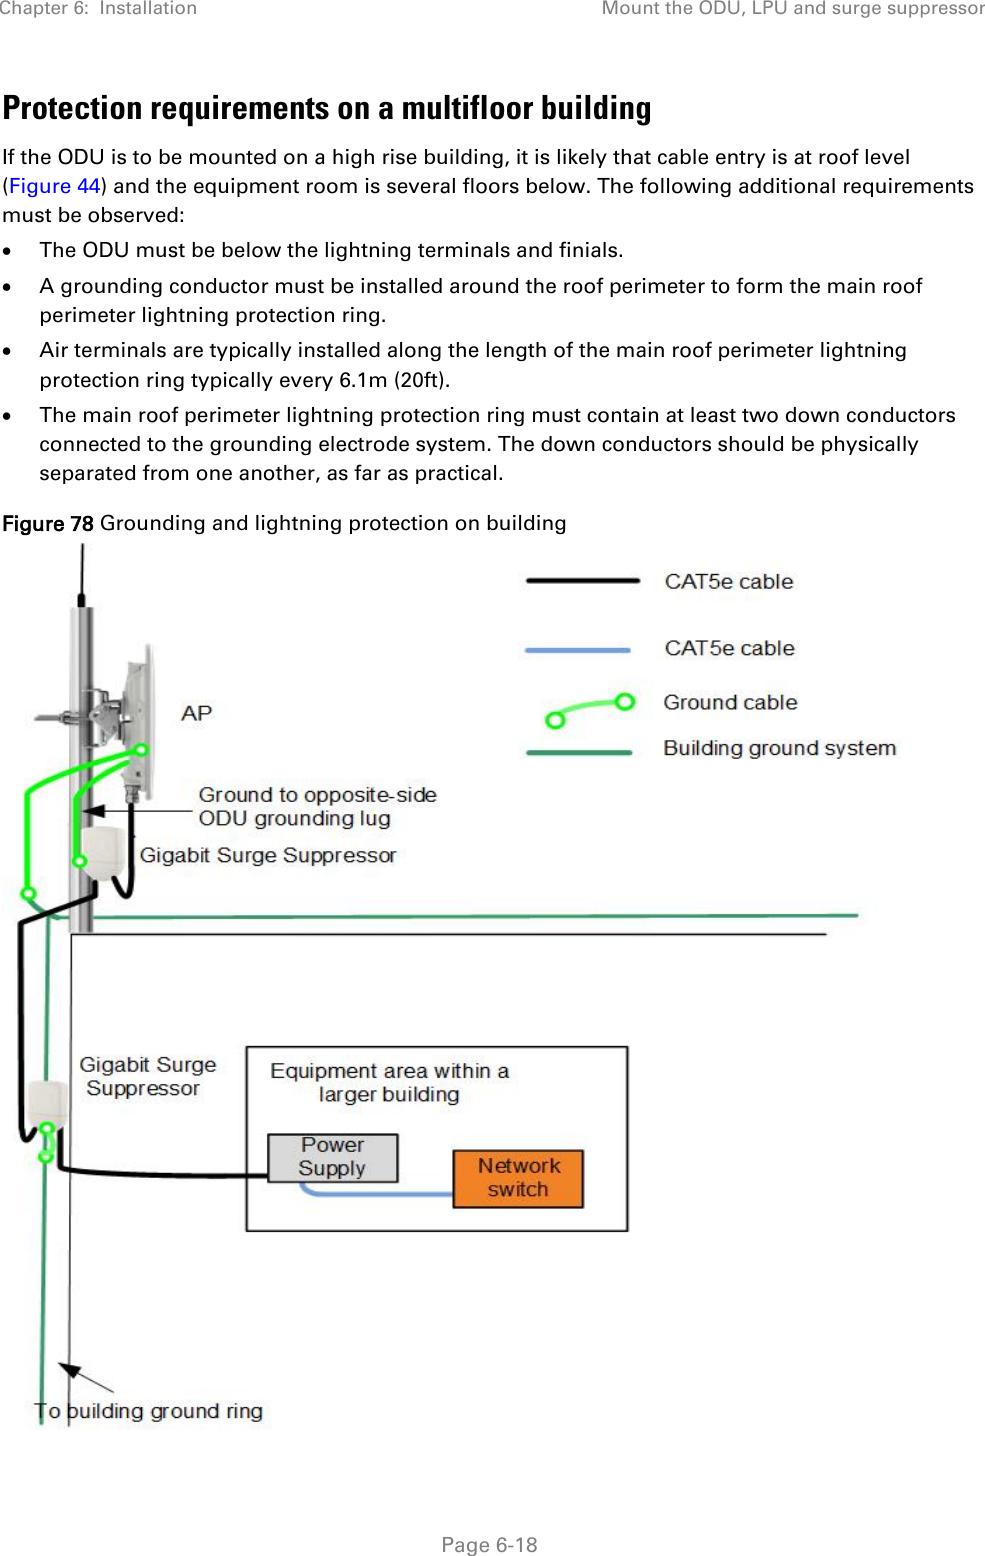 Chapter 6:  Installation Mount the ODU, LPU and surge suppressor   Page 6-18 Protection requirements on a multifloor building If the ODU is to be mounted on a high rise building, it is likely that cable entry is at roof level (Figure 44) and the equipment room is several floors below. The following additional requirements must be observed: • The ODU must be below the lightning terminals and finials. • A grounding conductor must be installed around the roof perimeter to form the main roof perimeter lightning protection ring. • Air terminals are typically installed along the length of the main roof perimeter lightning protection ring typically every 6.1m (20ft). • The main roof perimeter lightning protection ring must contain at least two down conductors connected to the grounding electrode system. The down conductors should be physically separated from one another, as far as practical. Figure 78 Grounding and lightning protection on building  